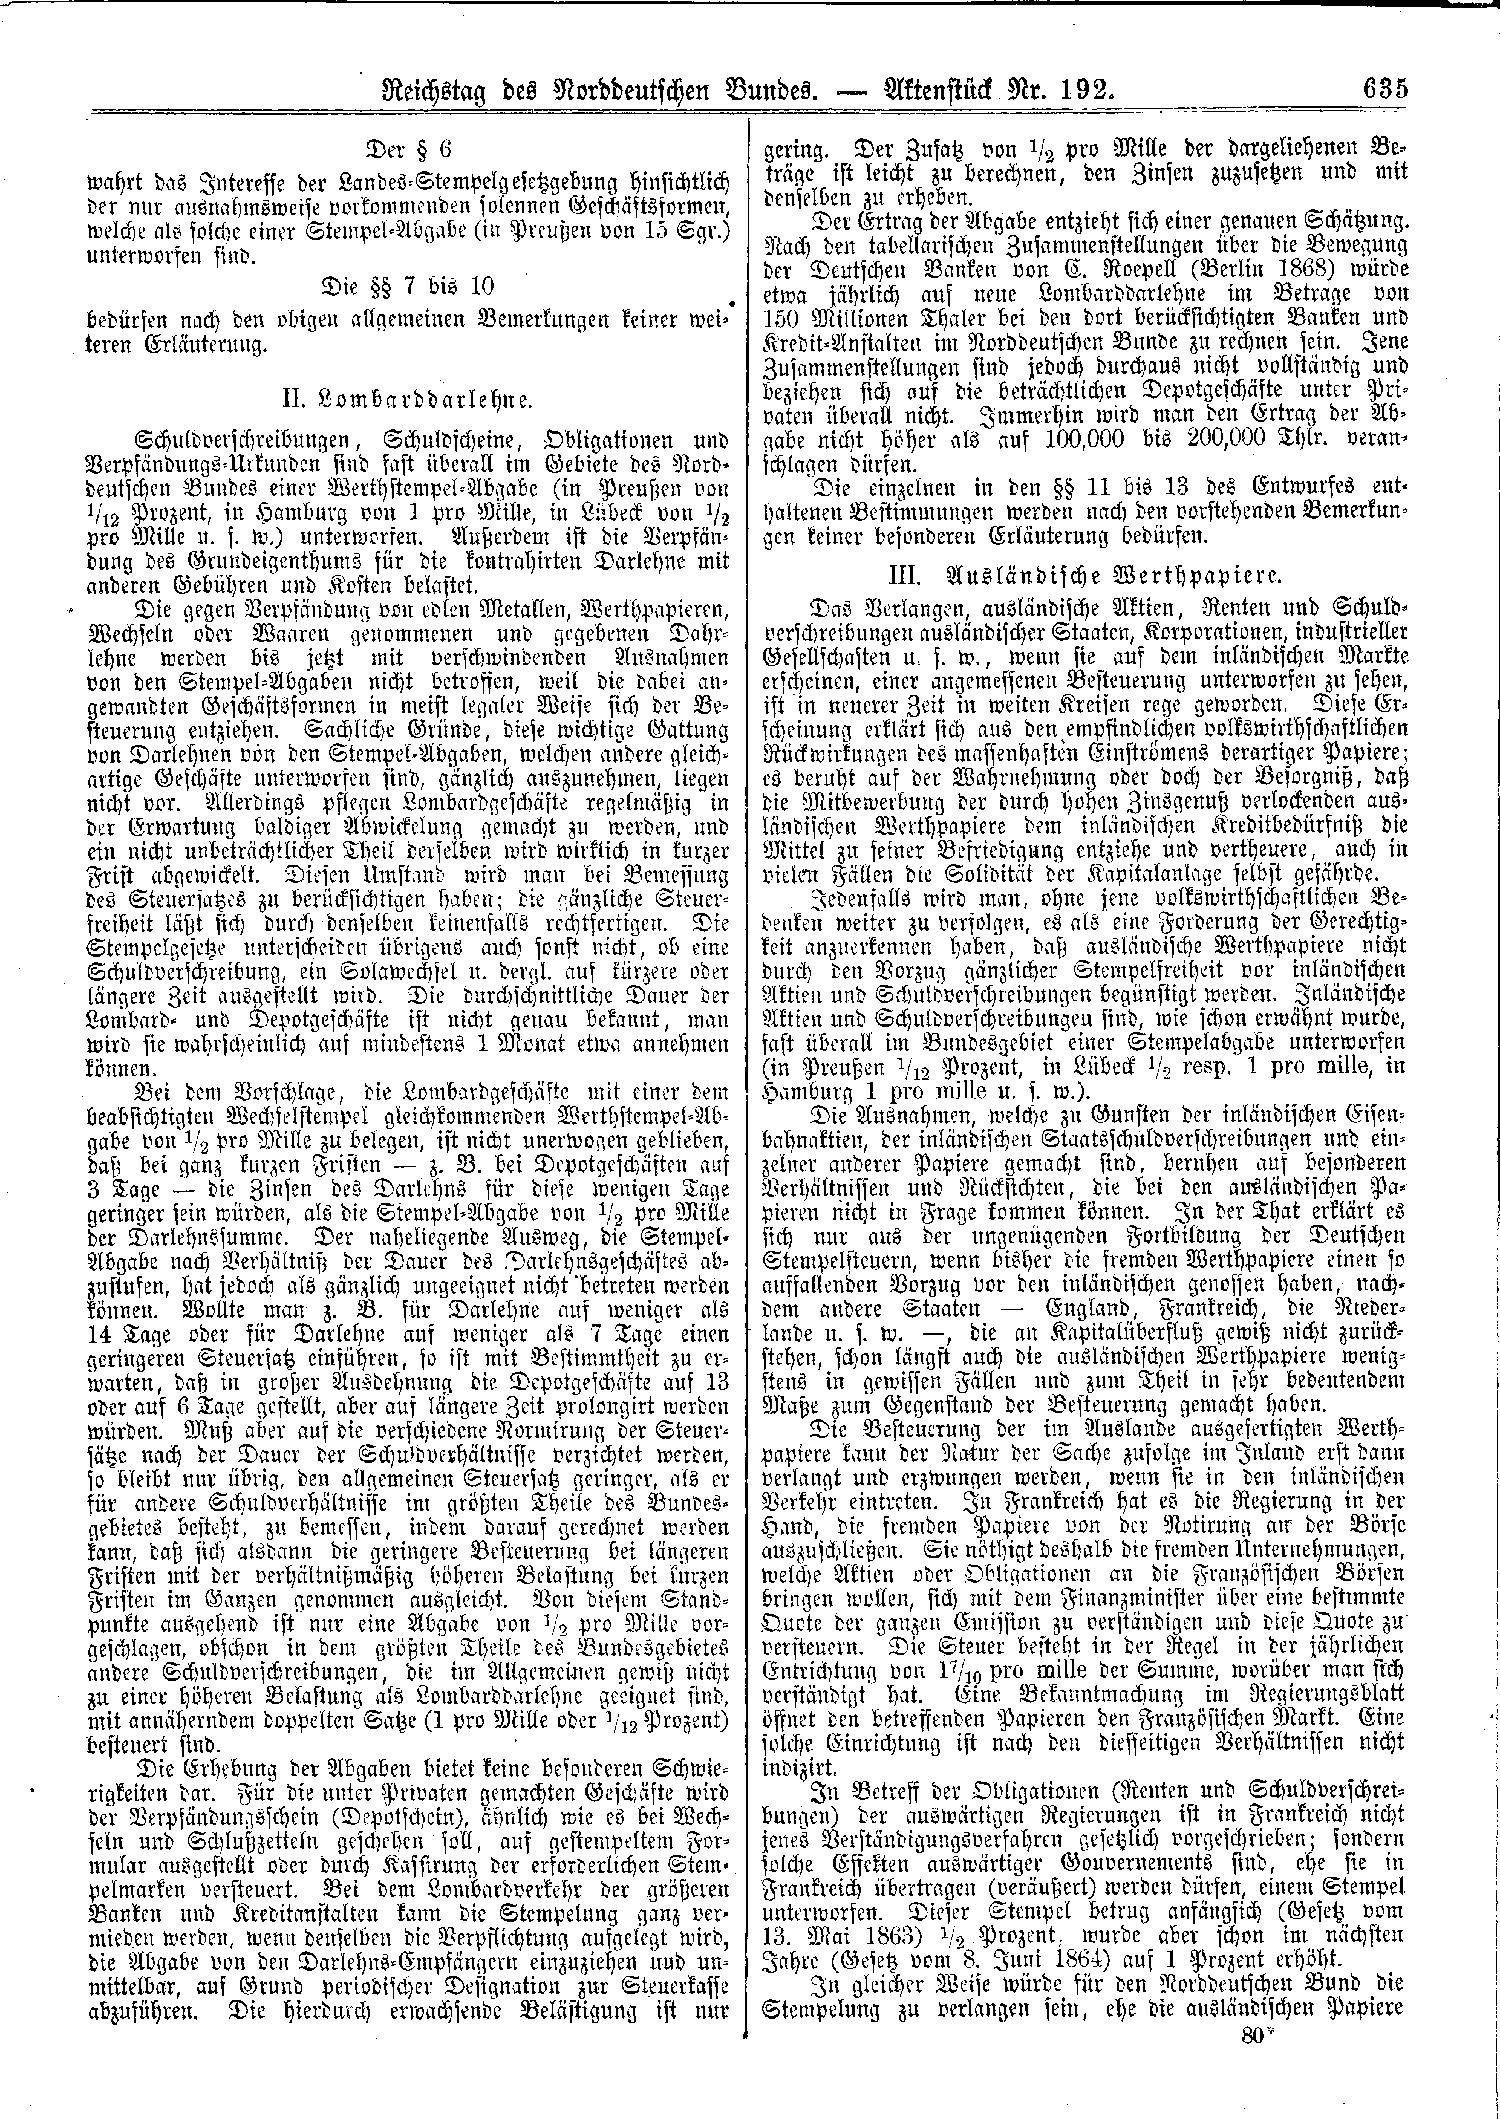 Scan of page 635